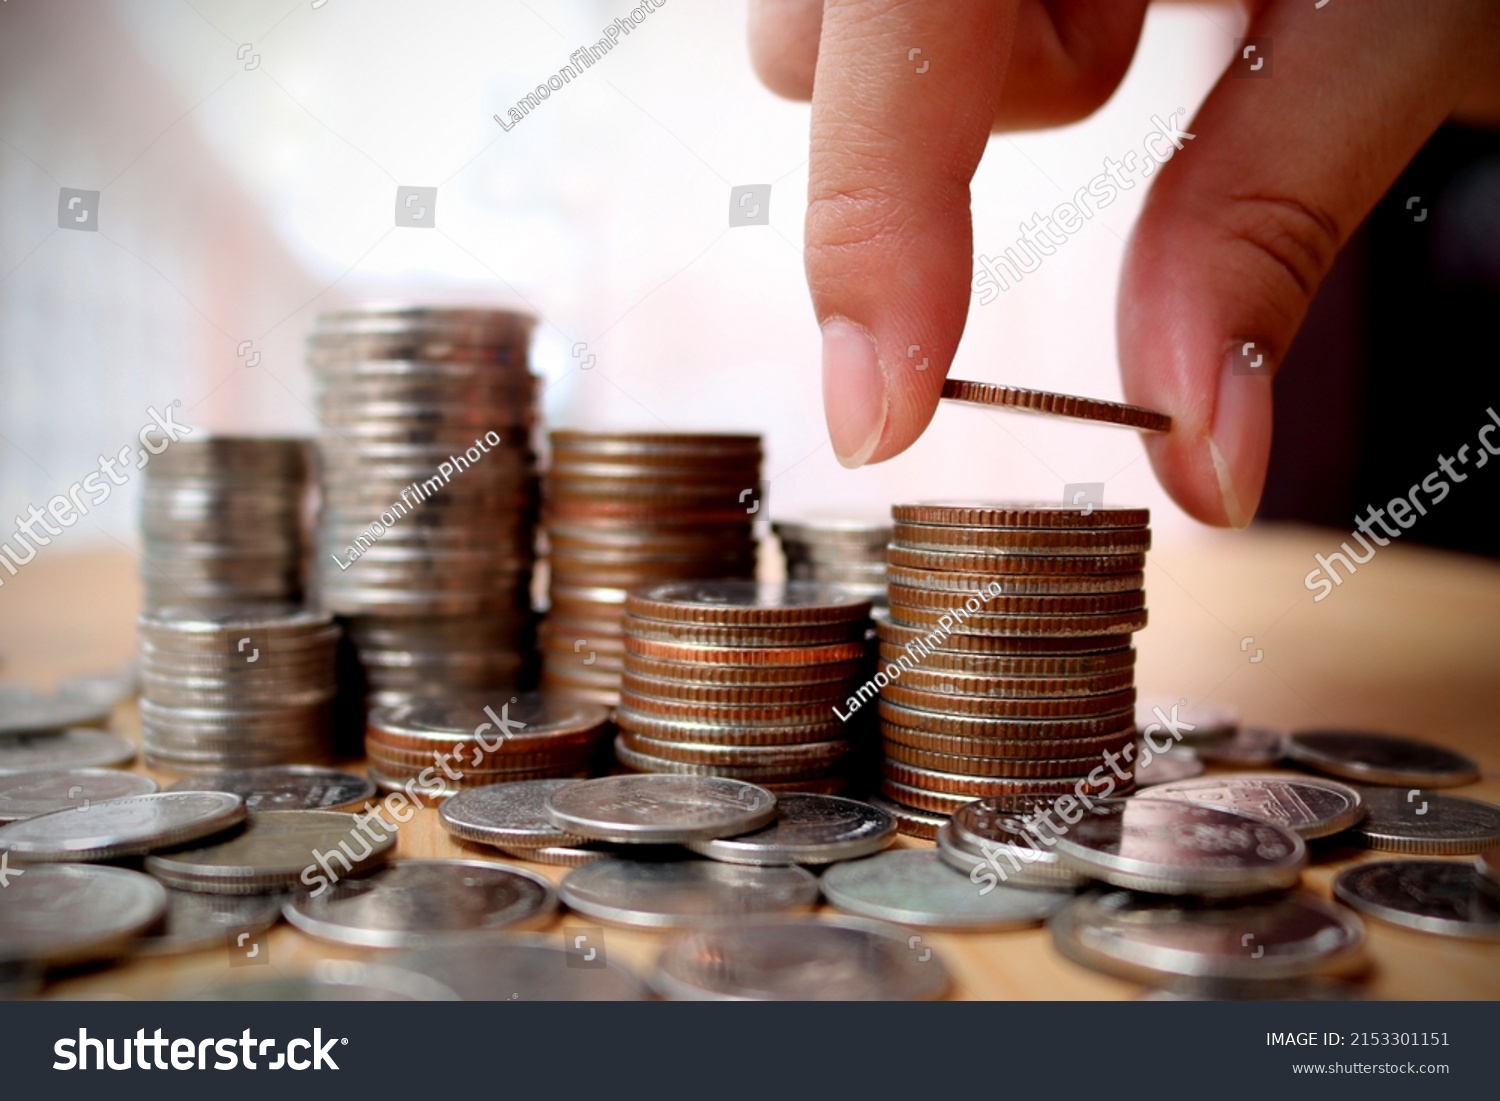 Close up of hand putting coins increase arranged on table. To convey the concepts of finance and Retirement fund. #2153301151